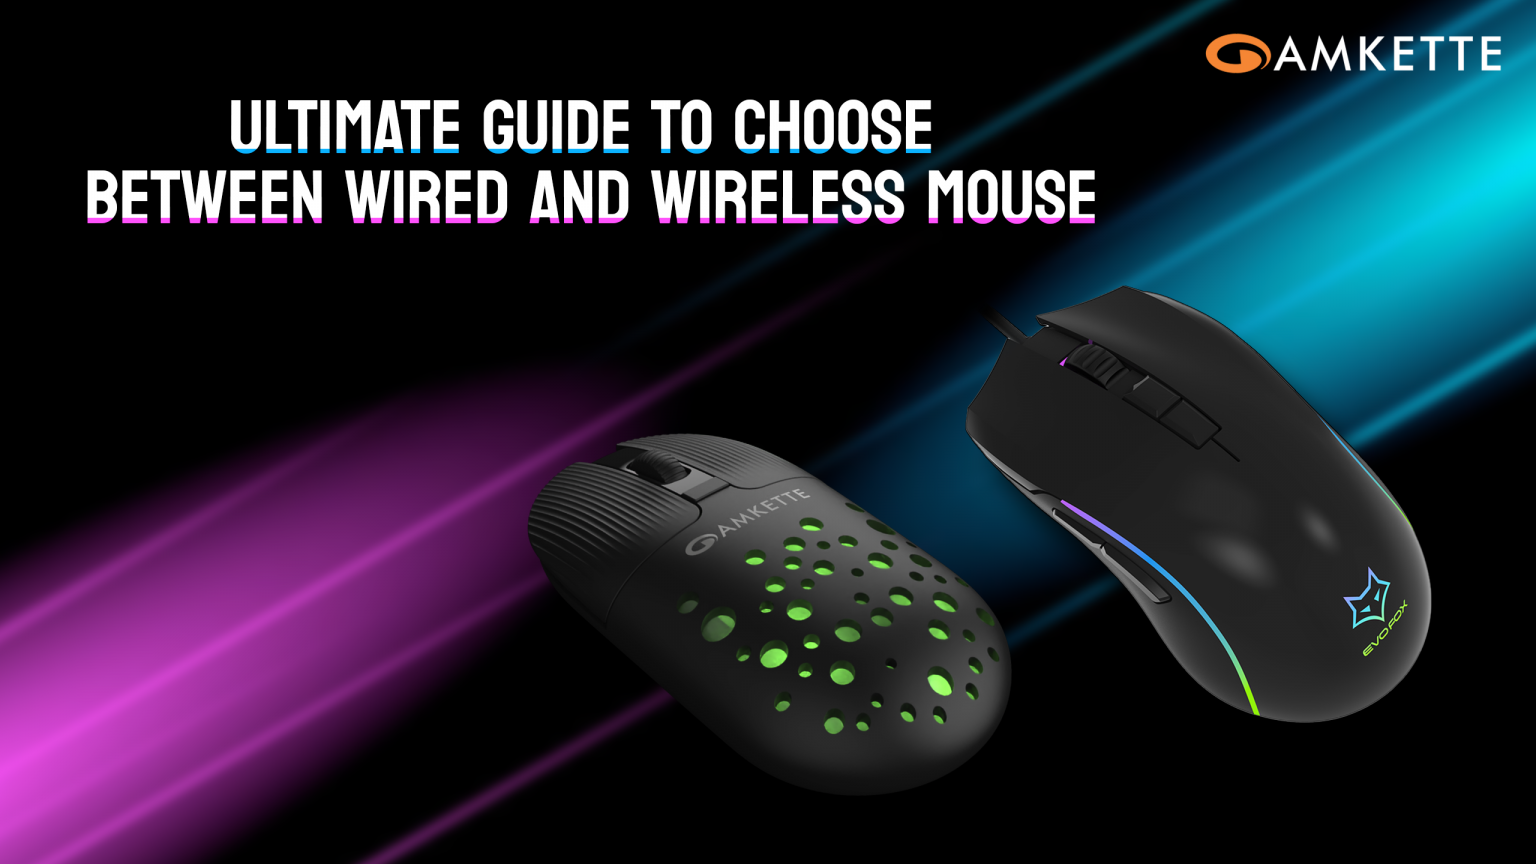 Wired Vs Wireless Mouse? Which one to go for? Let's Find Out! – Amkette